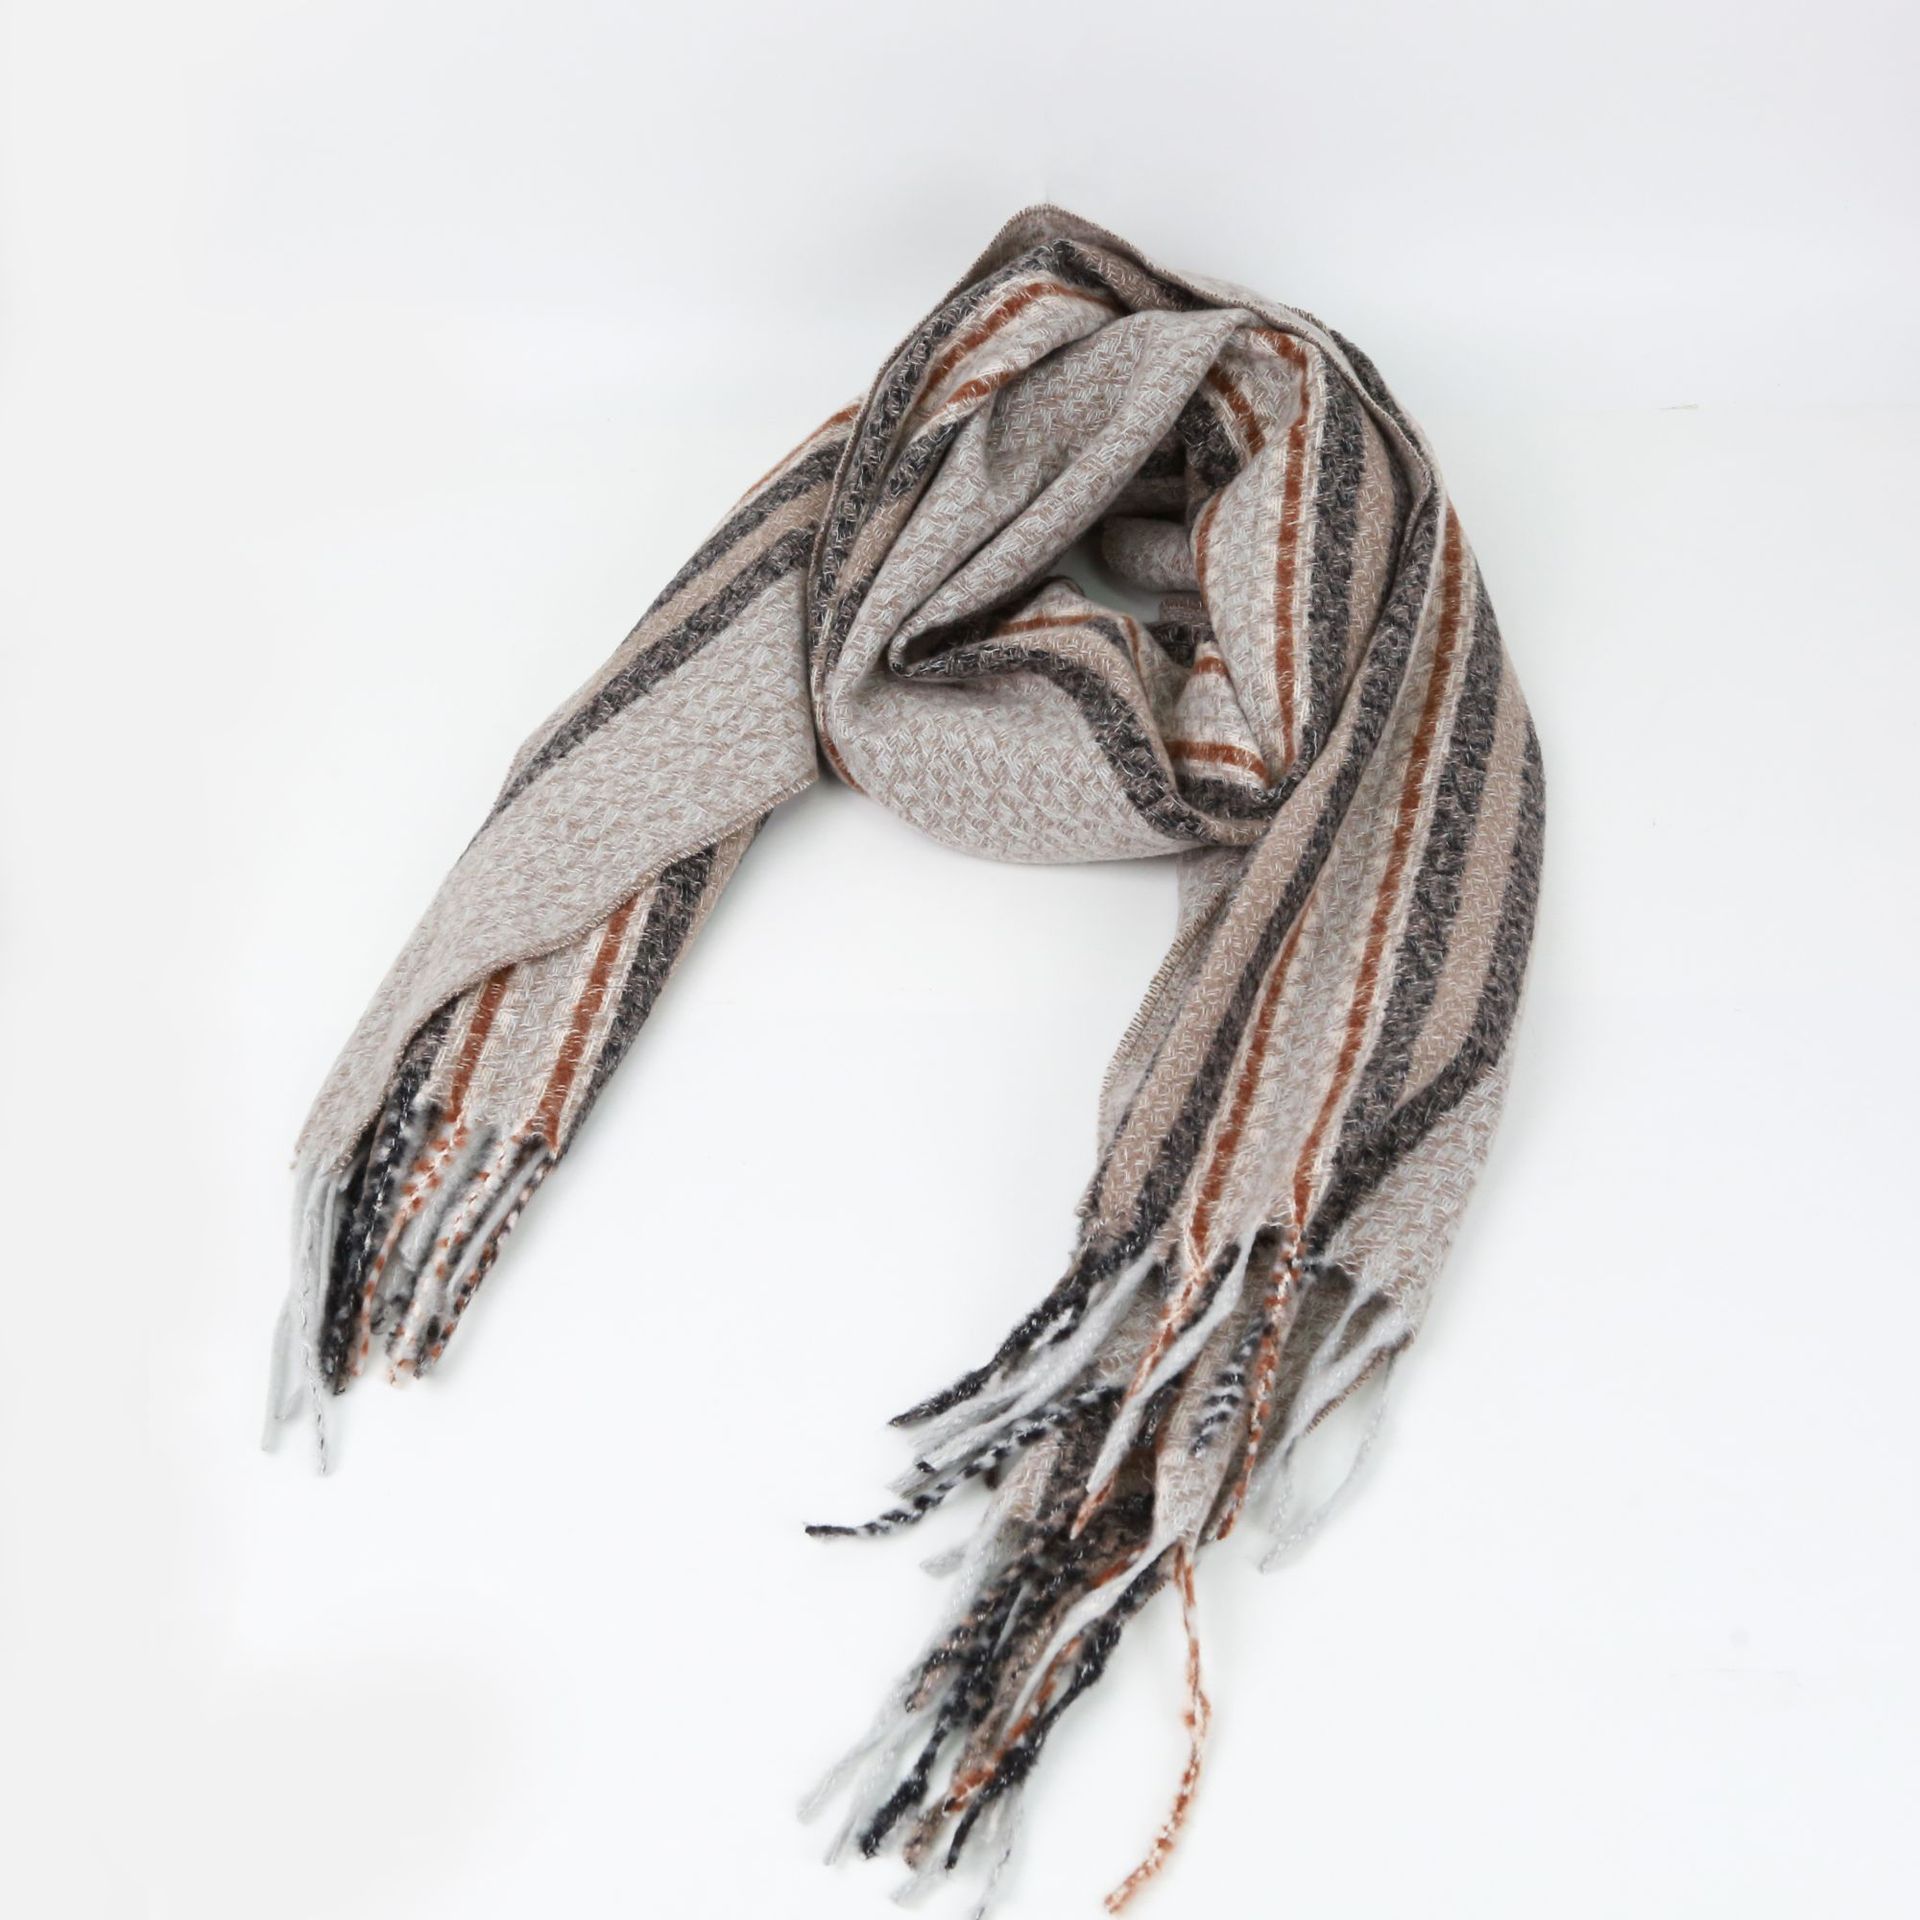 New Arrival of Autumn and Winter Scarf Men's and Women's Cashmere Scarf Women's Warm Shawl All-Match Scarf Cross-Border Approval